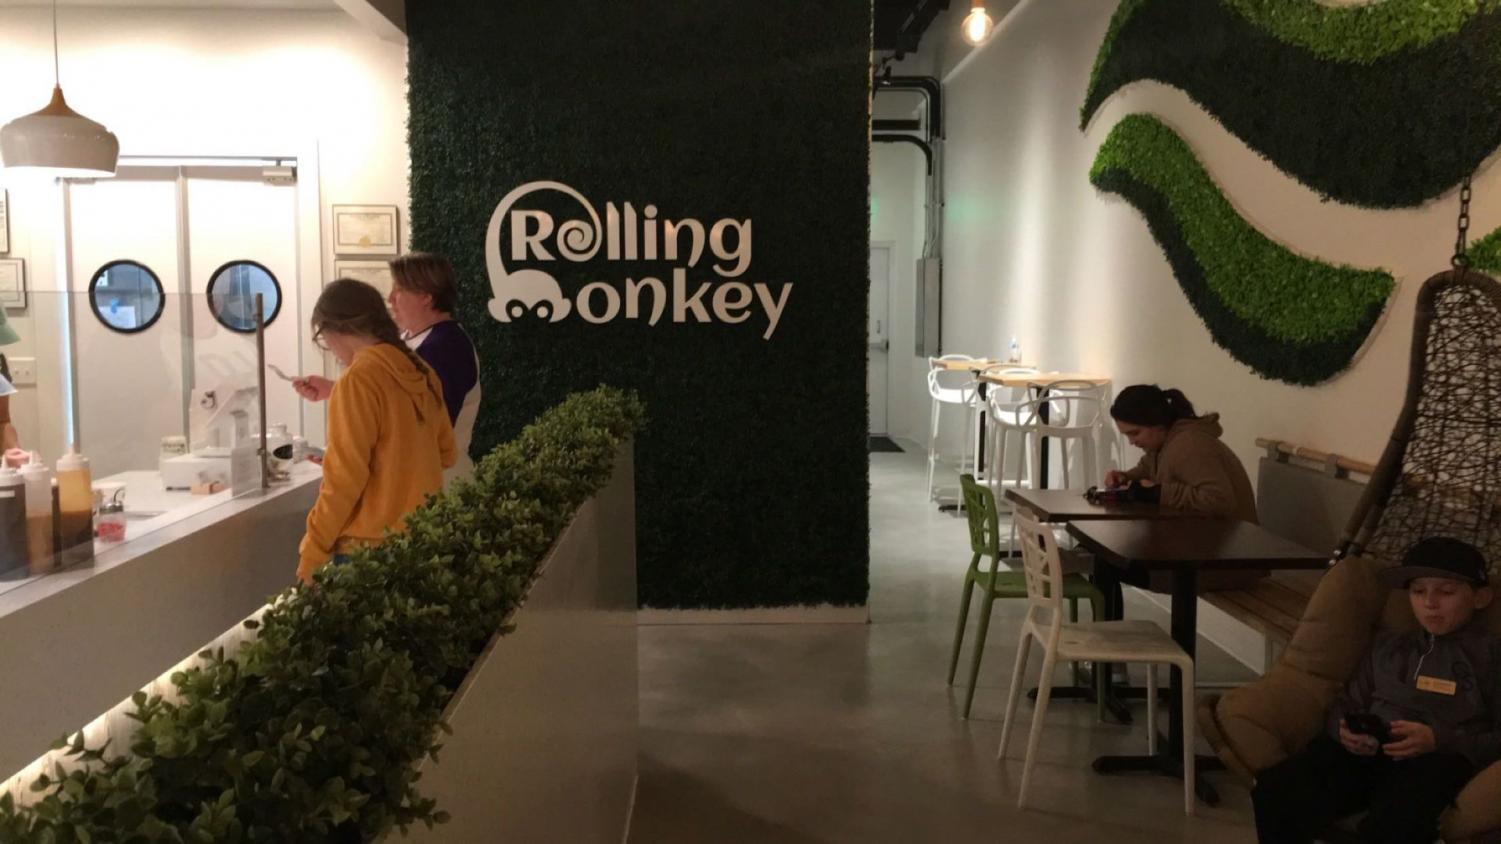 Rolling+Monkey%3A+A+look+inside+Statesboro%E2%80%99s+first+rolled+ice+cream+parlor